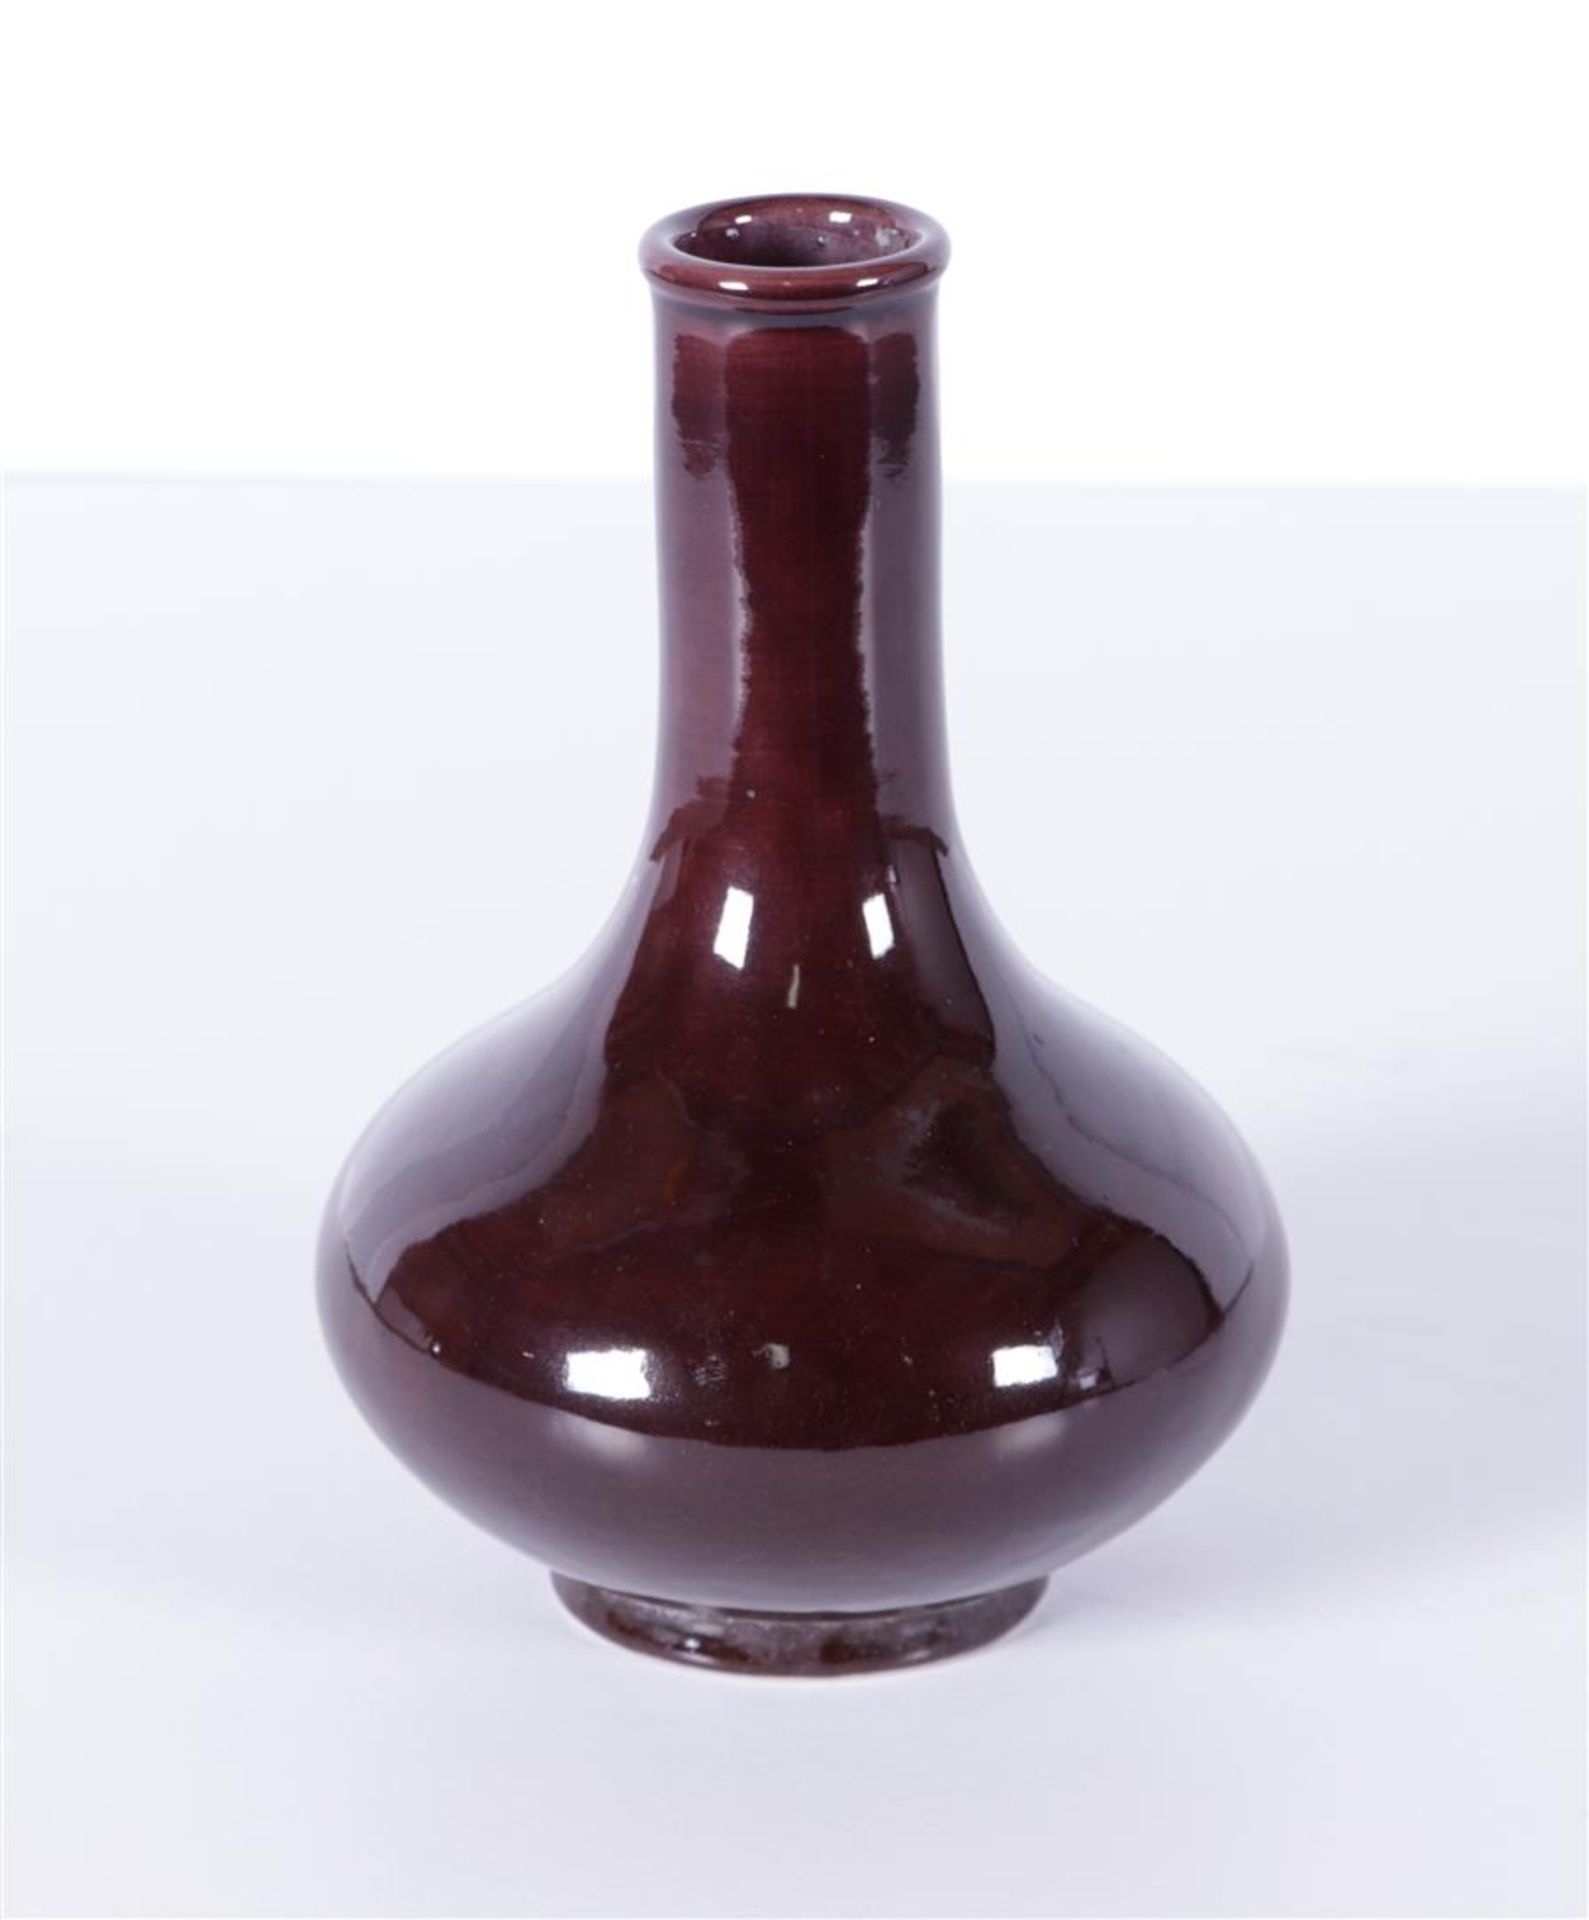 A brown glazed stem vase, marked Qiangling. China, 19/20th century.
H. 17 cm.